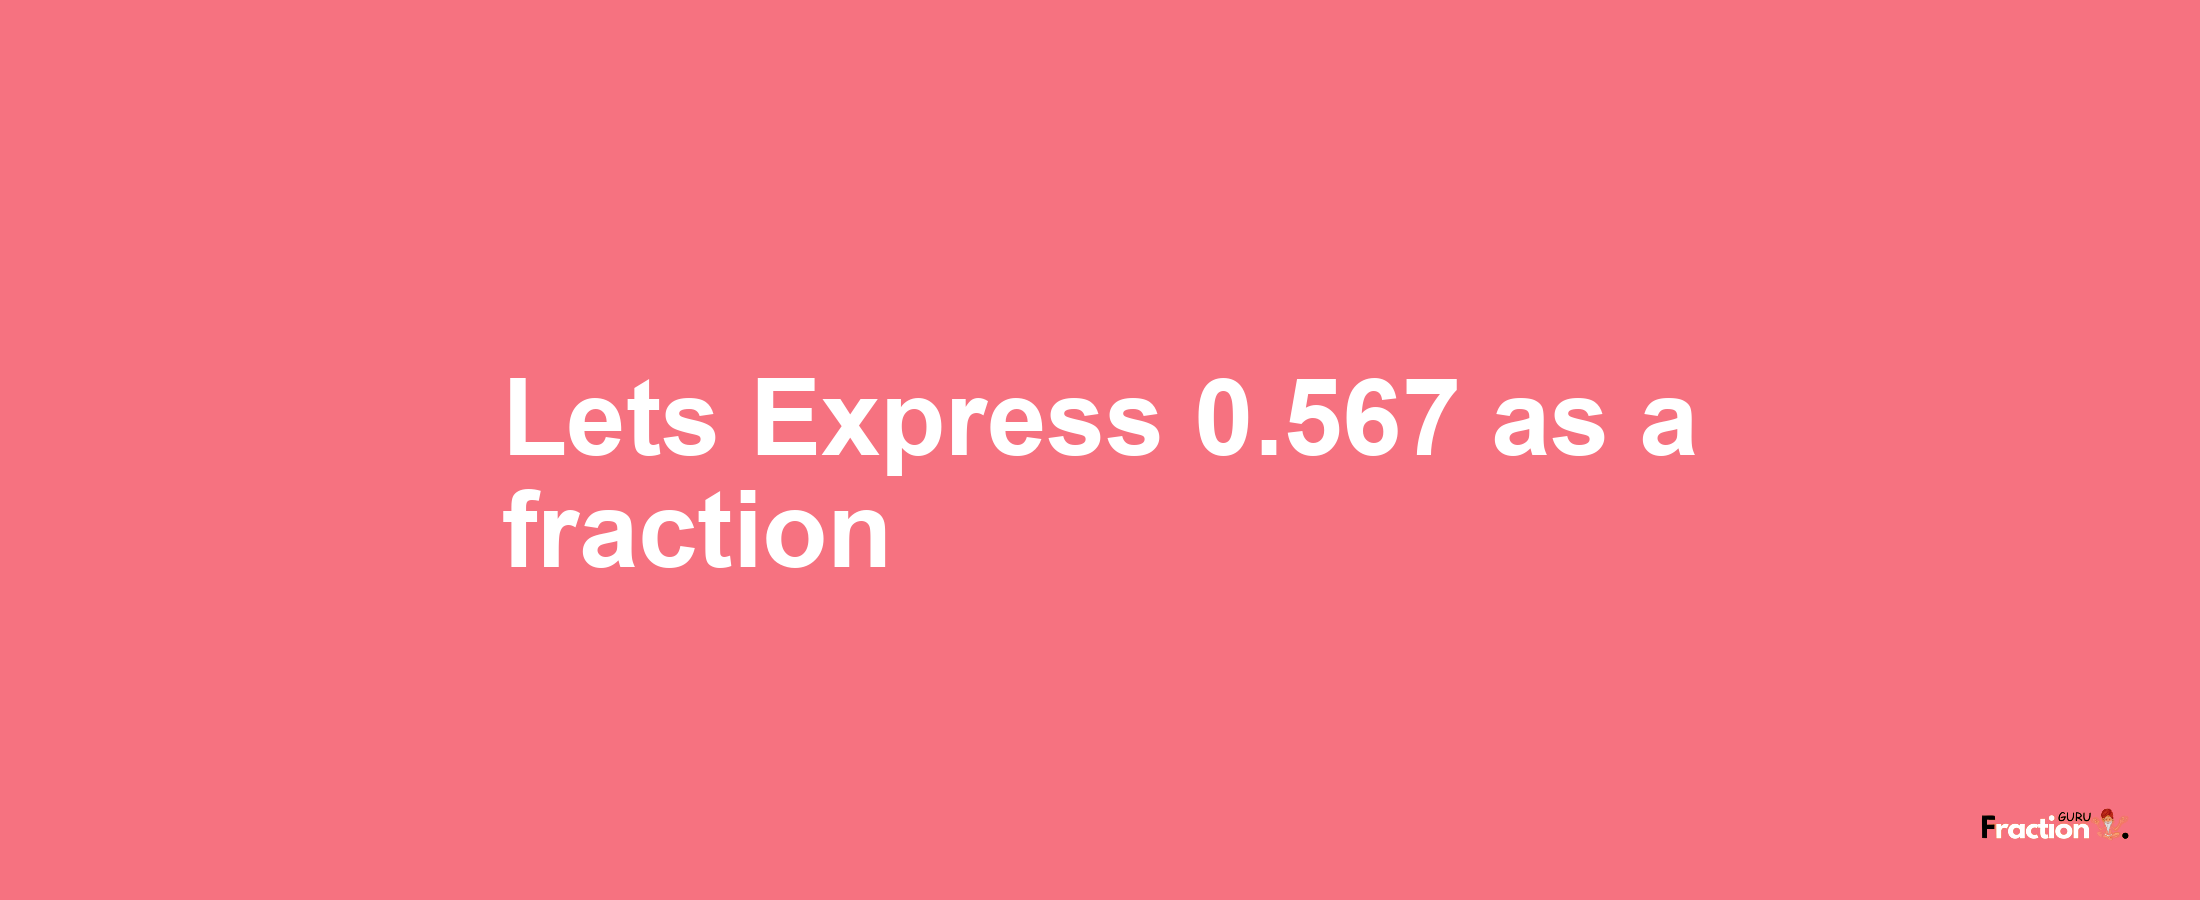 Lets Express 0.567 as afraction